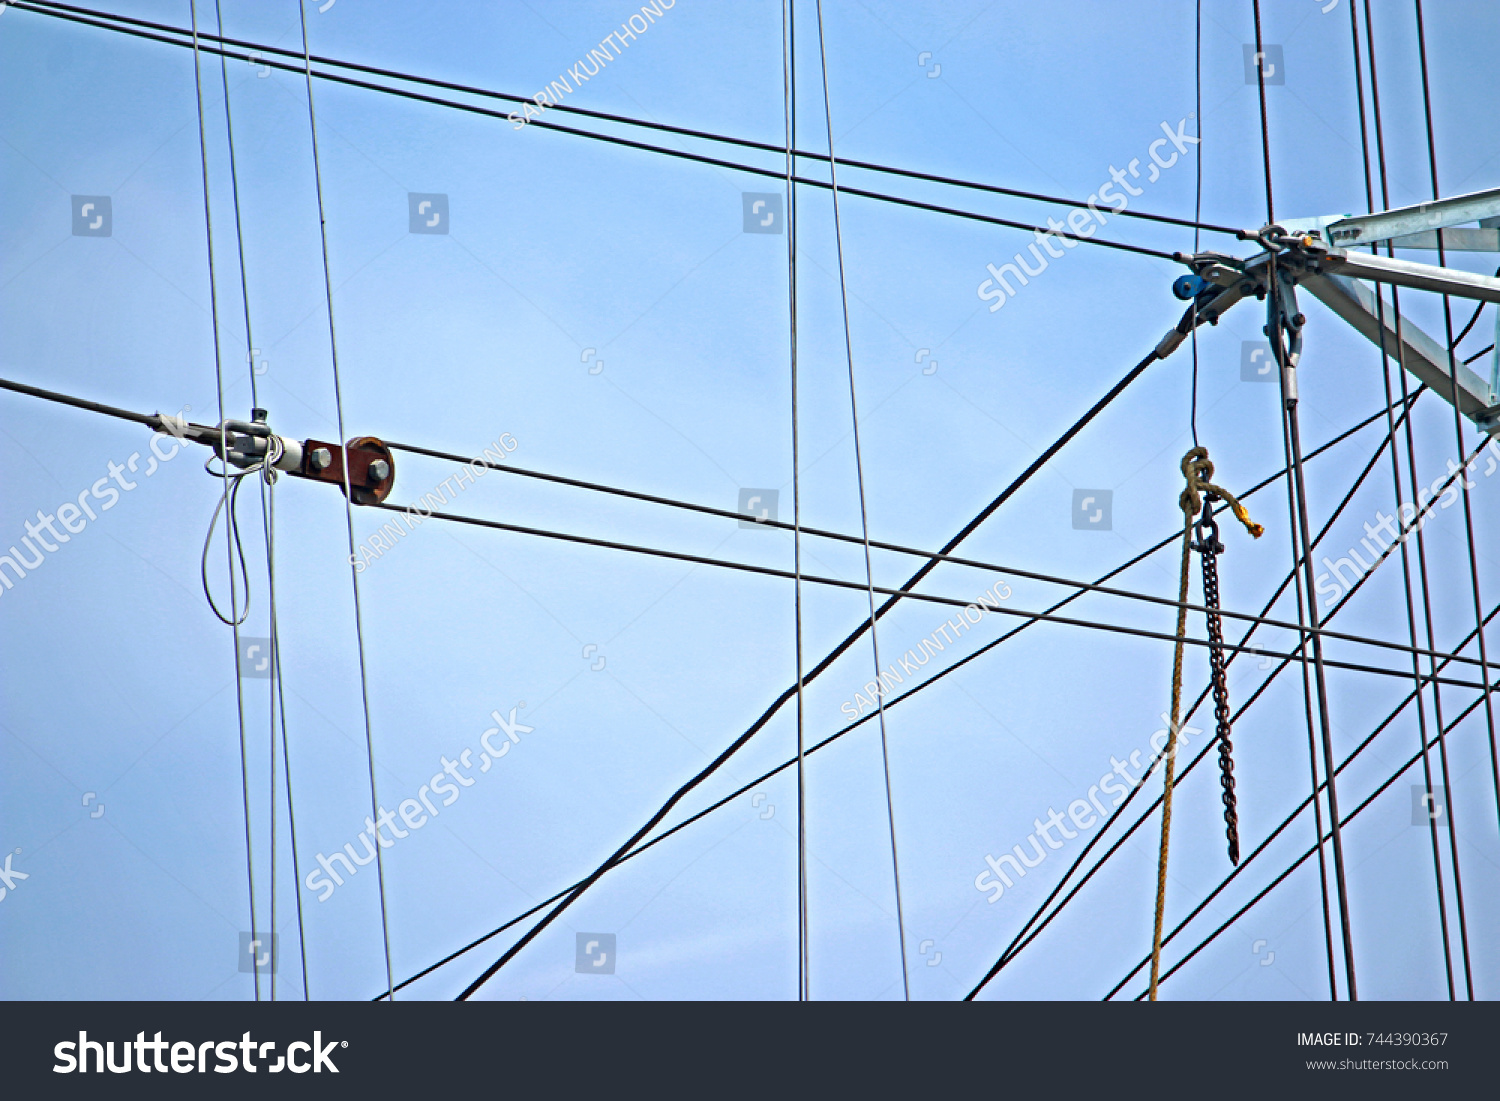 Steel Pulley Winch Load Test Stock Photo (Edit Now) 744390367